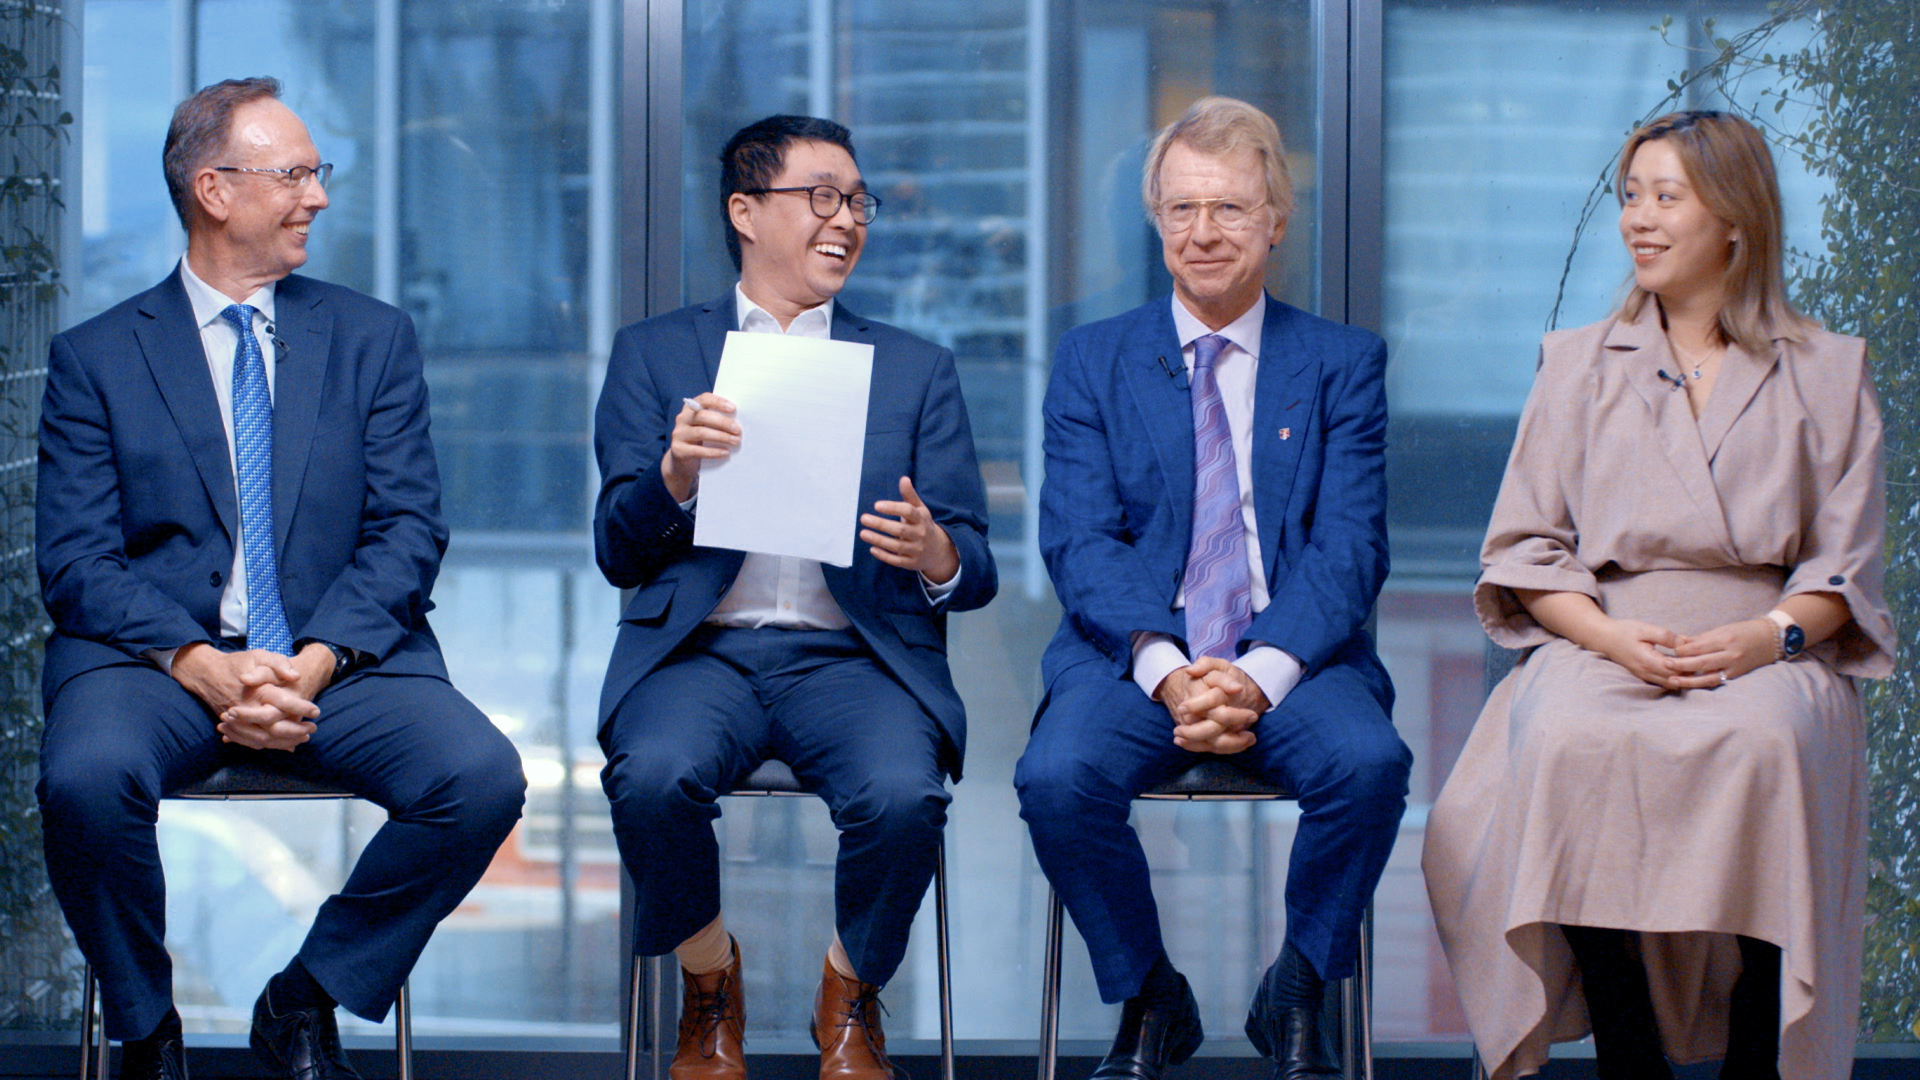 Michael Price of Ausbil Investment Management, Hans Lee of Livewire Markets, Dr Shane Oliver of AMP, and Amy Xie Patrick of Pendal Group sit down for the latest edition of Signal or Noise.